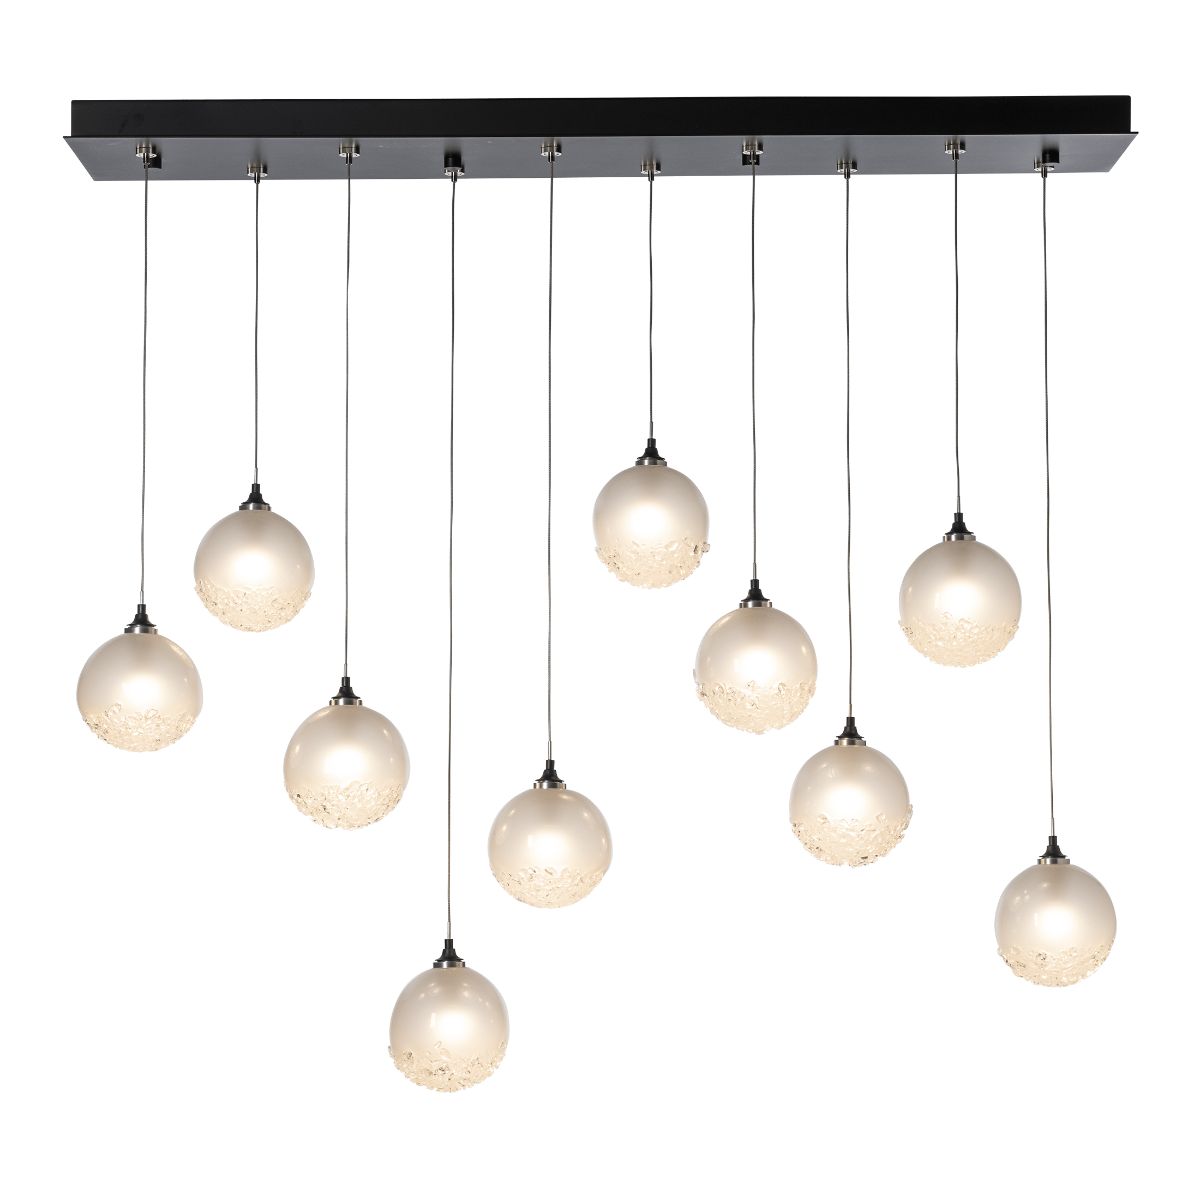 Fritz 45 in. 10 lights Linear Pendant Light with Long Height - Bees Lighting